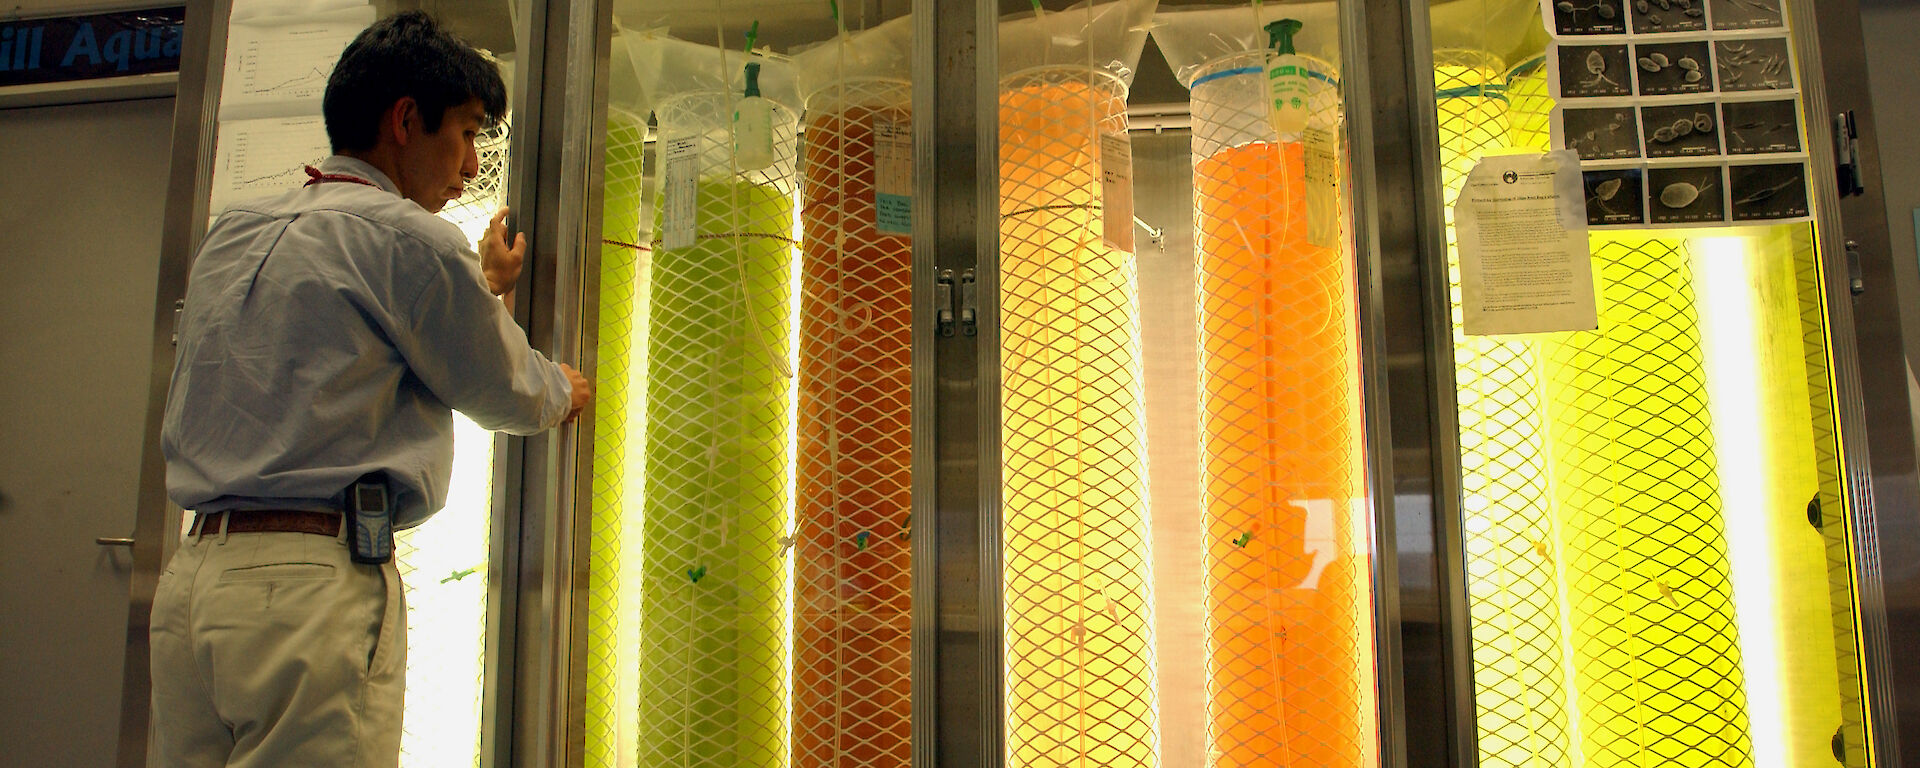 Scientists looks into a glass cabinet holding long bags of orange and green krill food